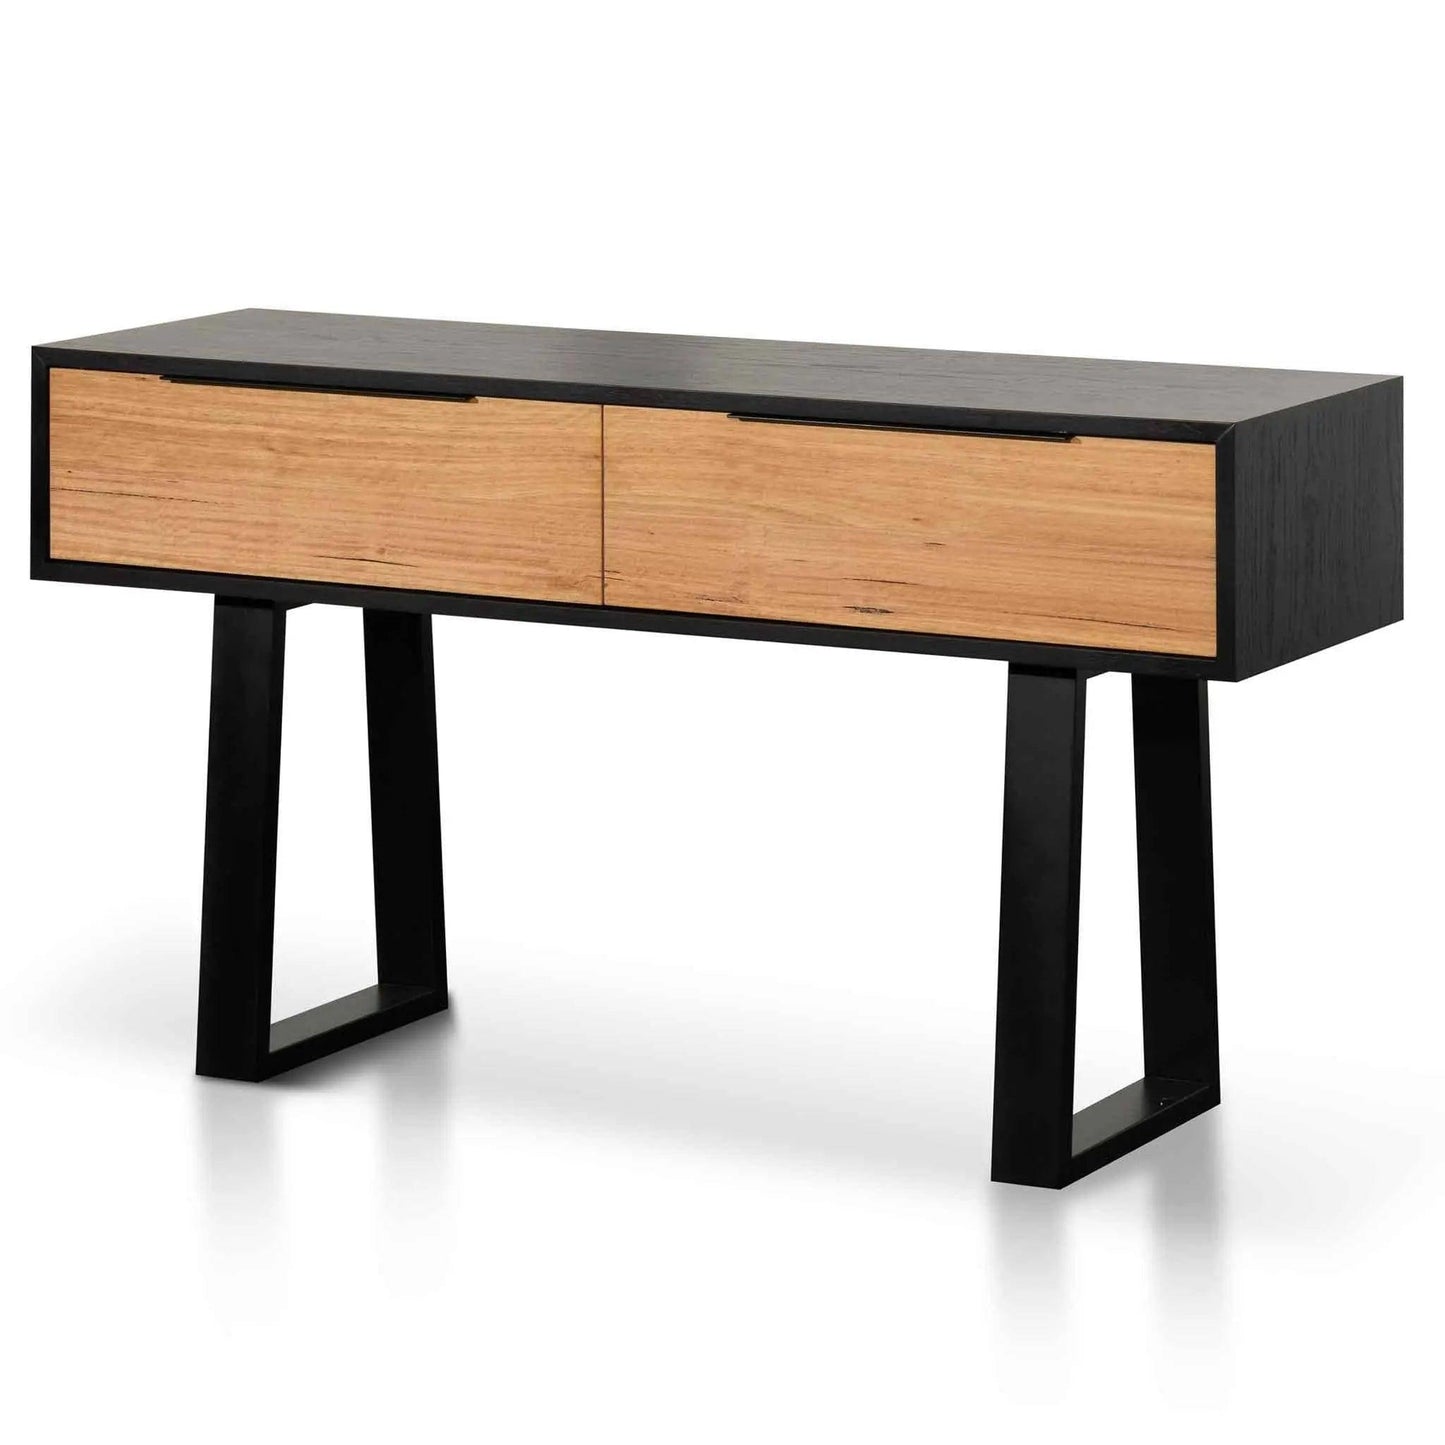 Calibre 1.3m Console Table - Messmate - Console TablesDT6334-AW 2